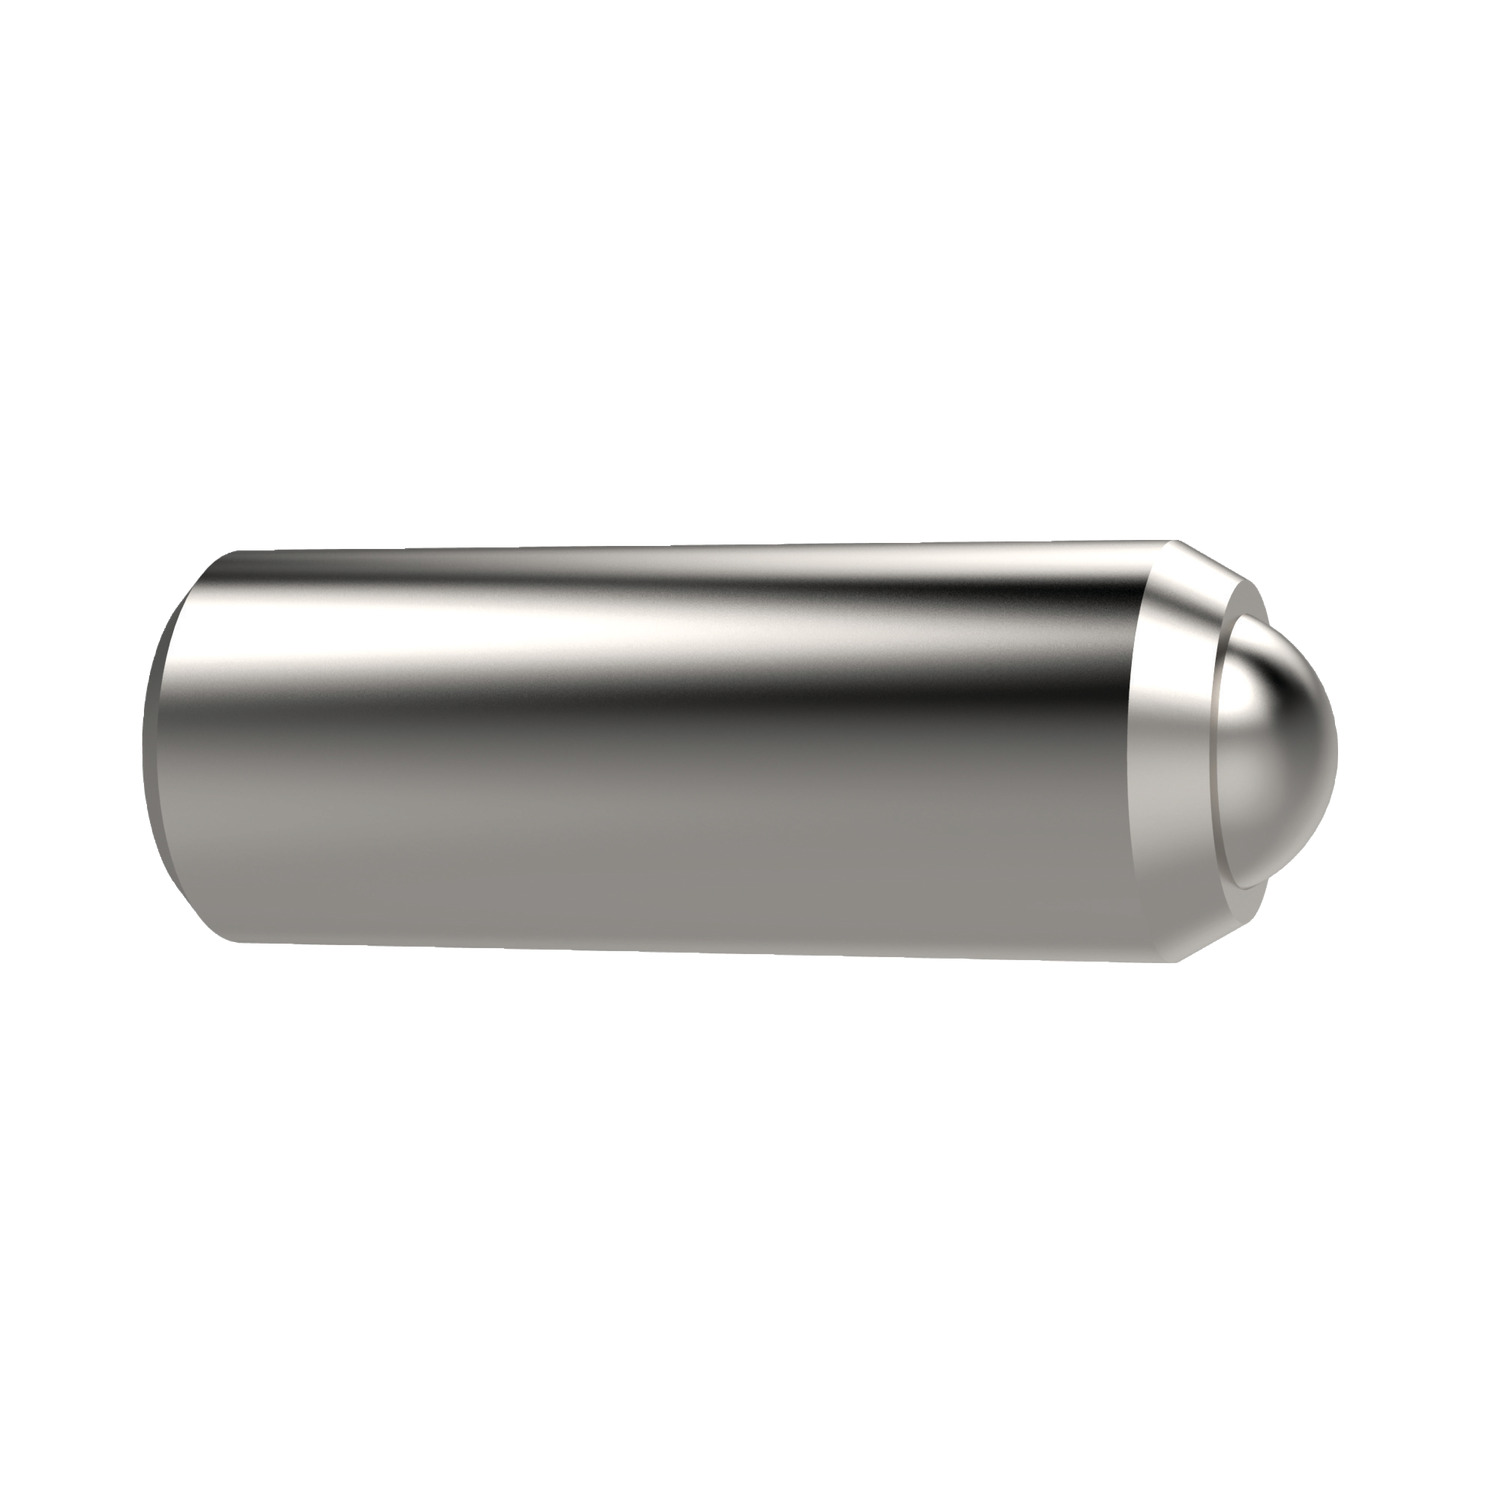 32280.W0306 Spring Plunger Ball - Smooth Model All Stainless - 2,0 - 1,0 - 3,5 EC:20252755 WG:05063052016141